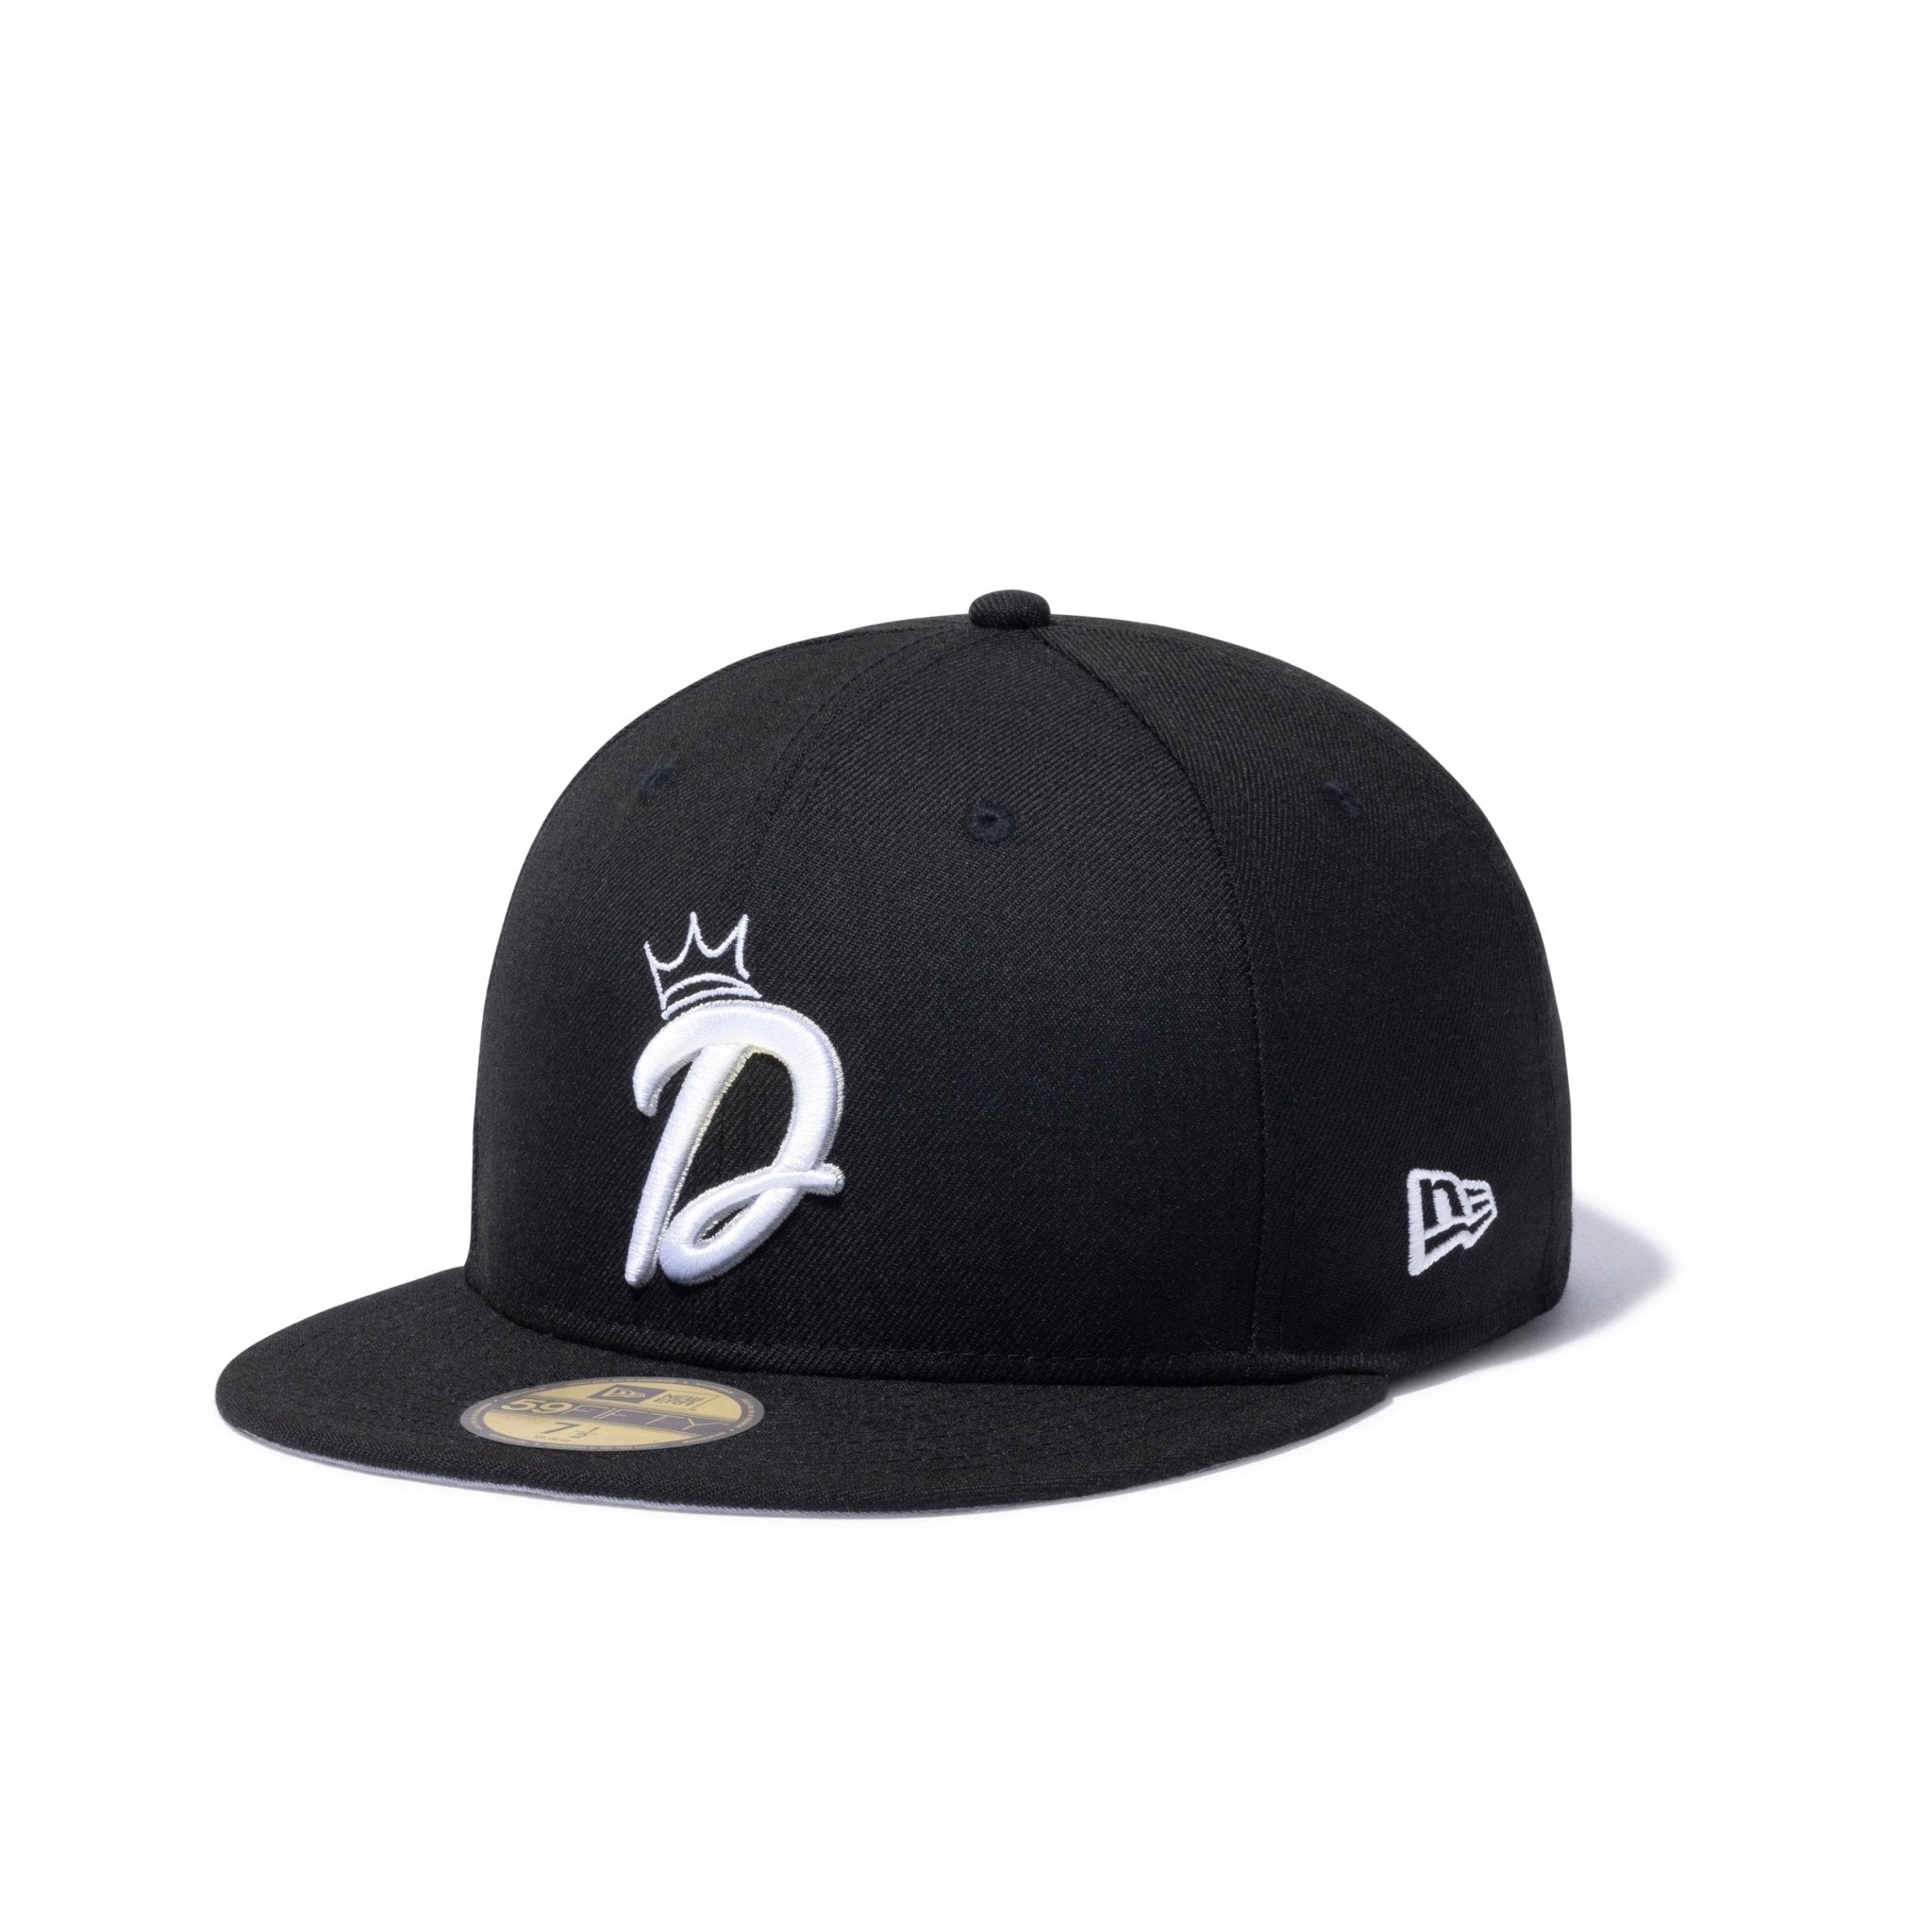 ７3/4 Dogear Records NEW ERA 59FIFTY Dロゴ - キャップ